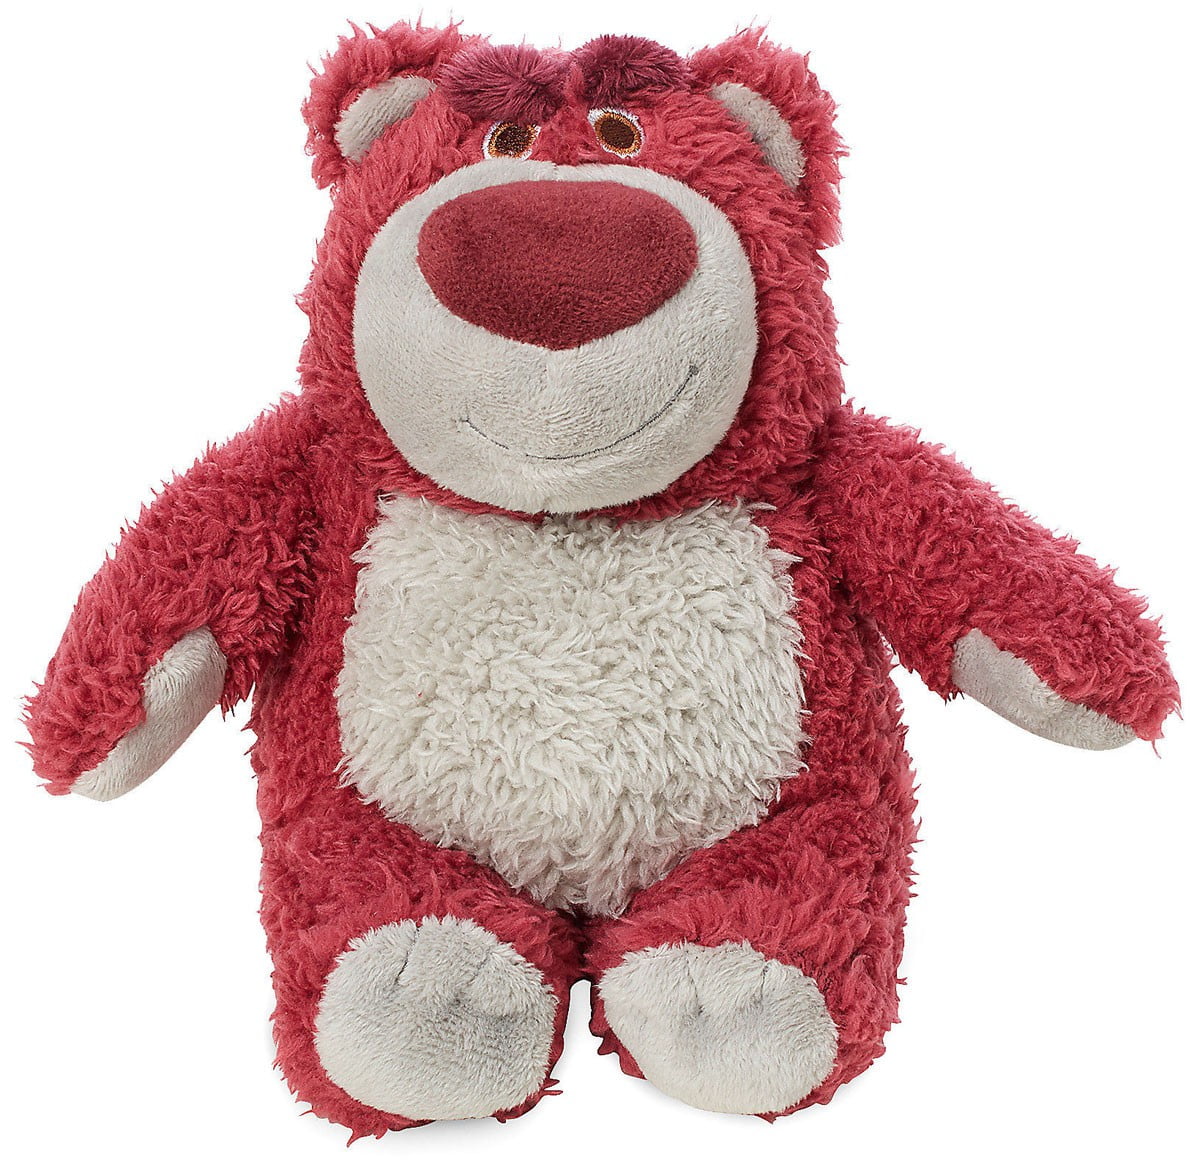 Official disney store large lotso hugging bear smells of strawberry 